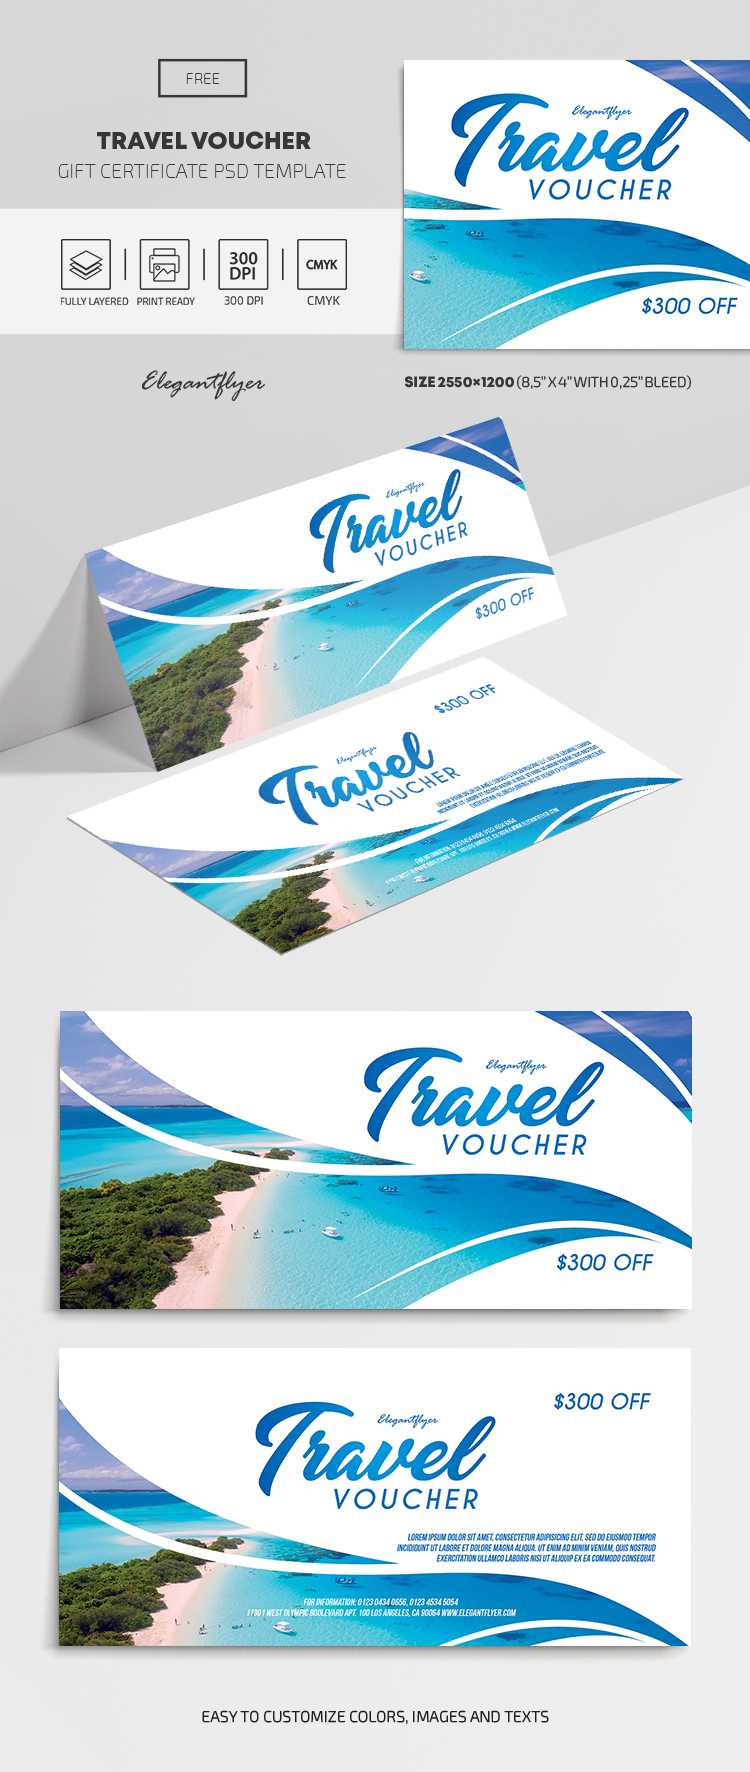 Travel Voucher – Free Gift Certificate Template – For Free Travel Gift Certificate Template